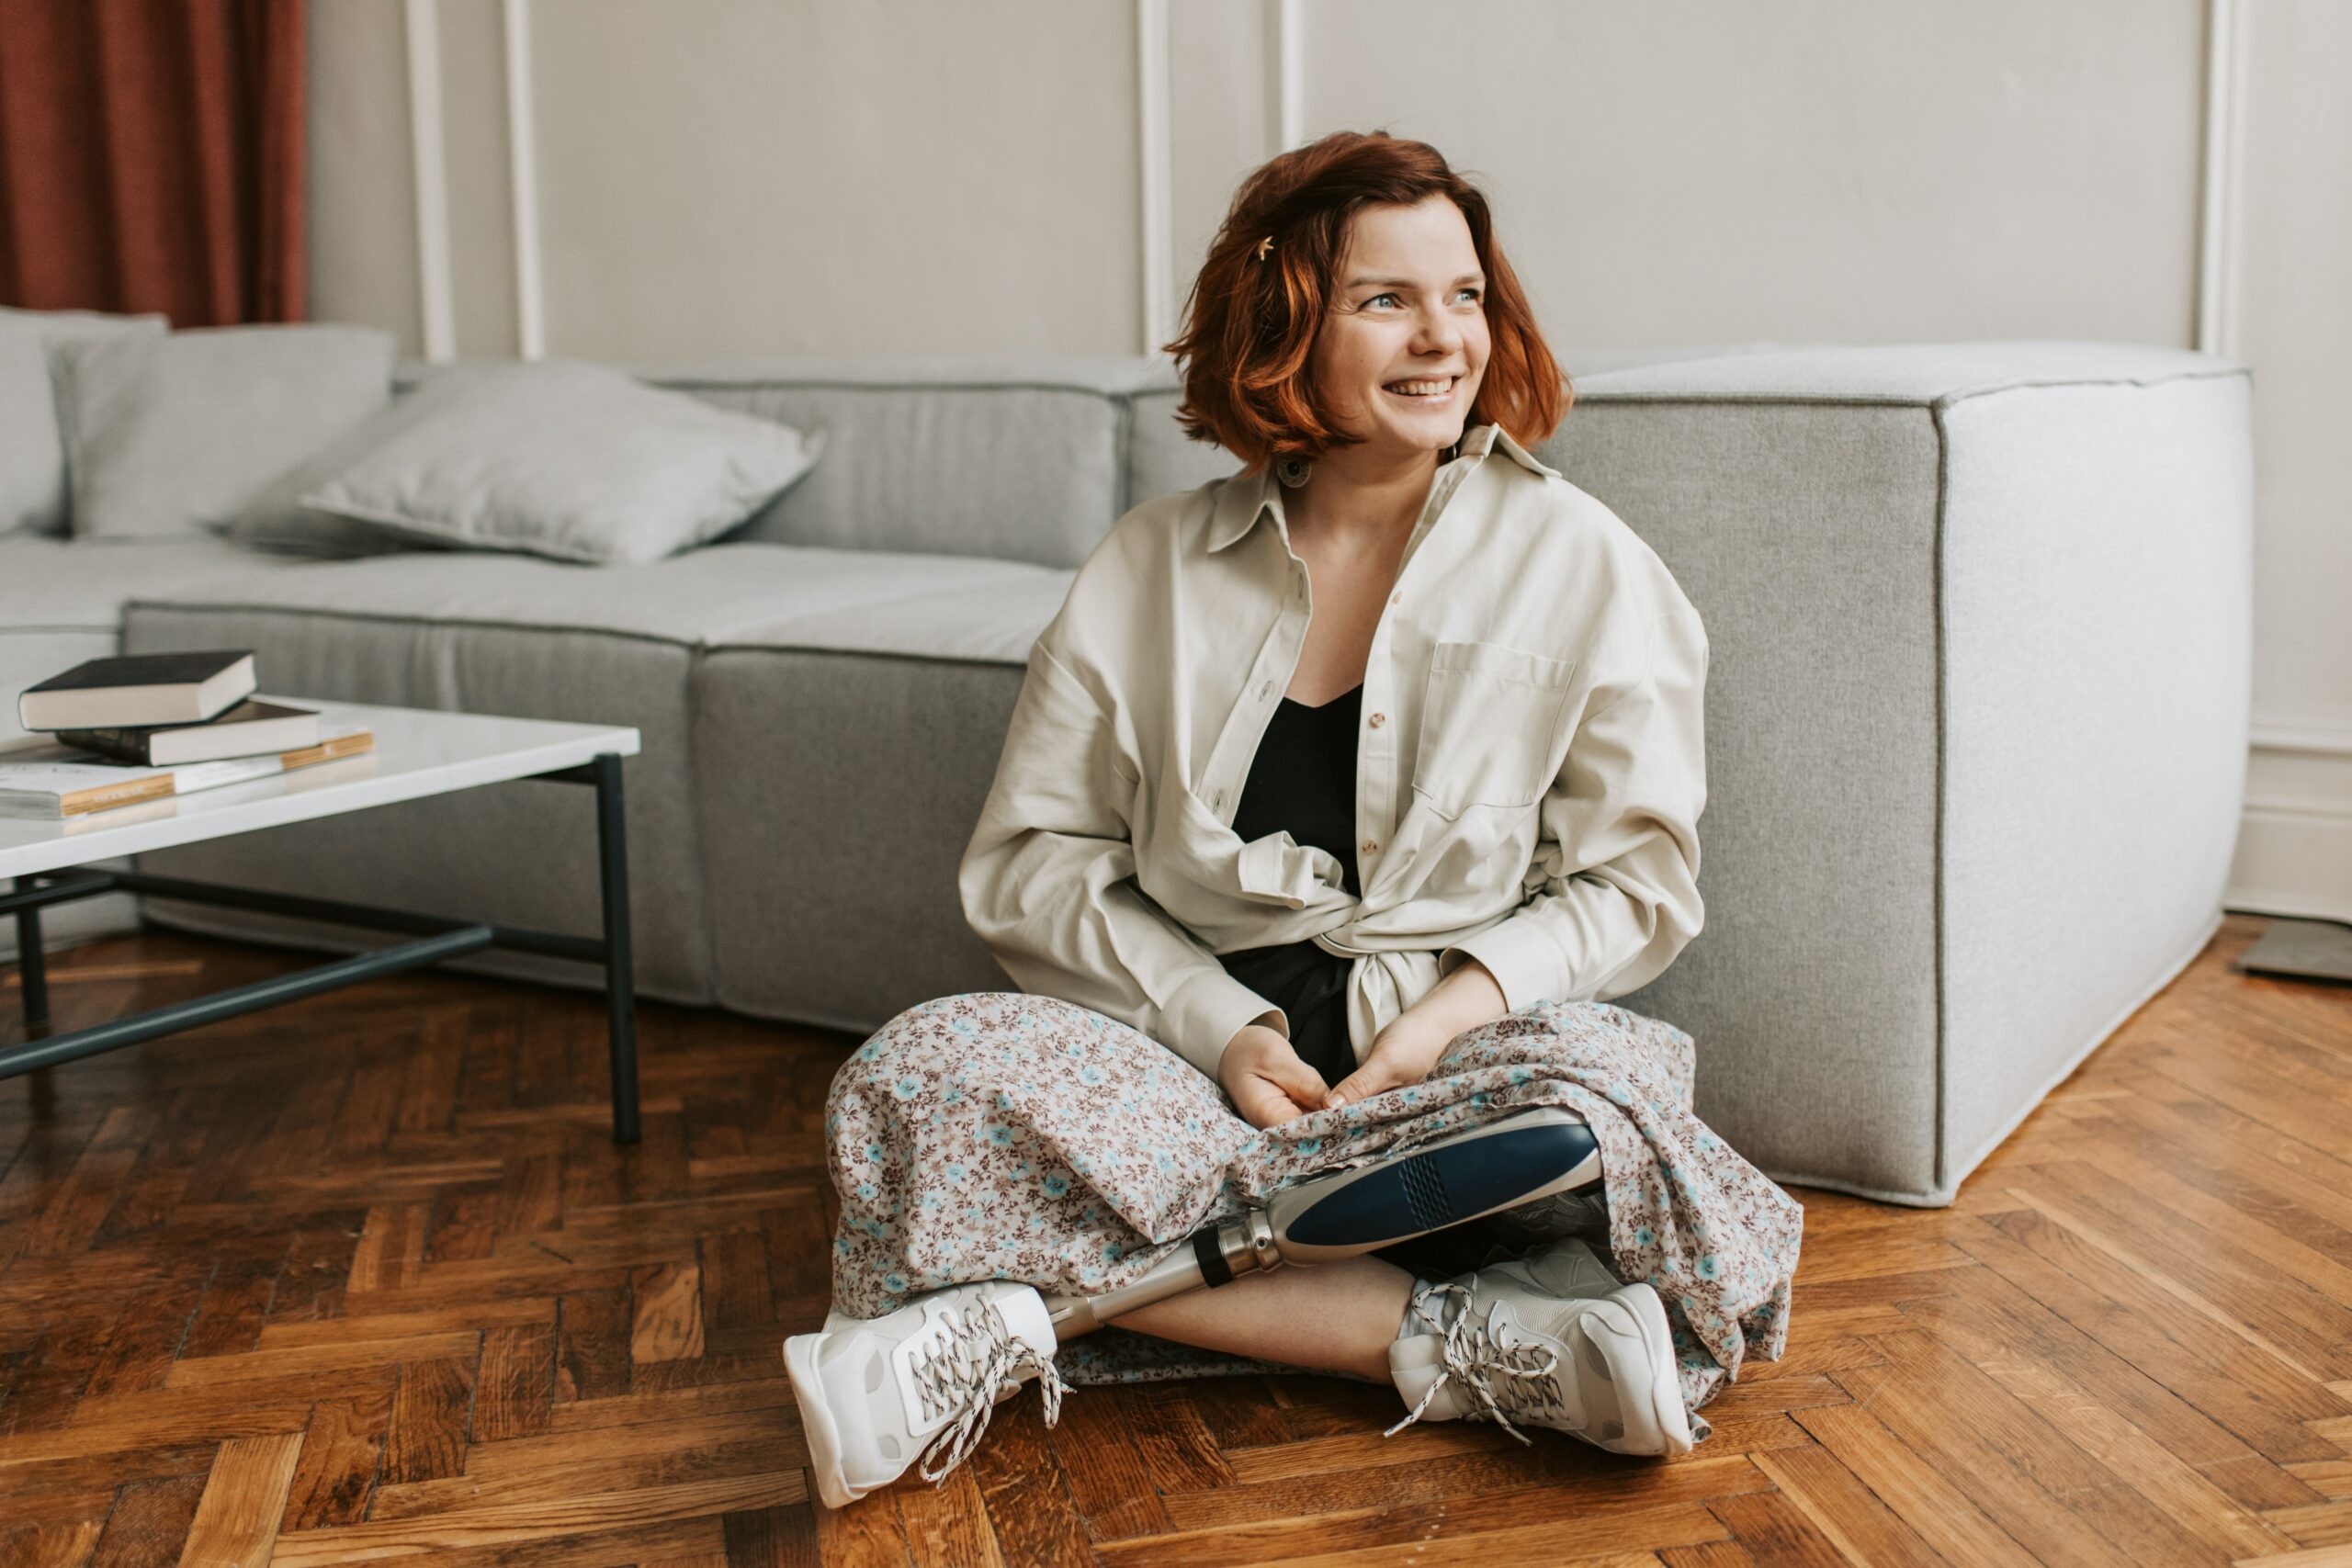 This is a photo a happy woman with a prosthetic leg sitting cross-legged on the floor of her home, against her sofa, smiling and looking out of the window, which is out of shot.